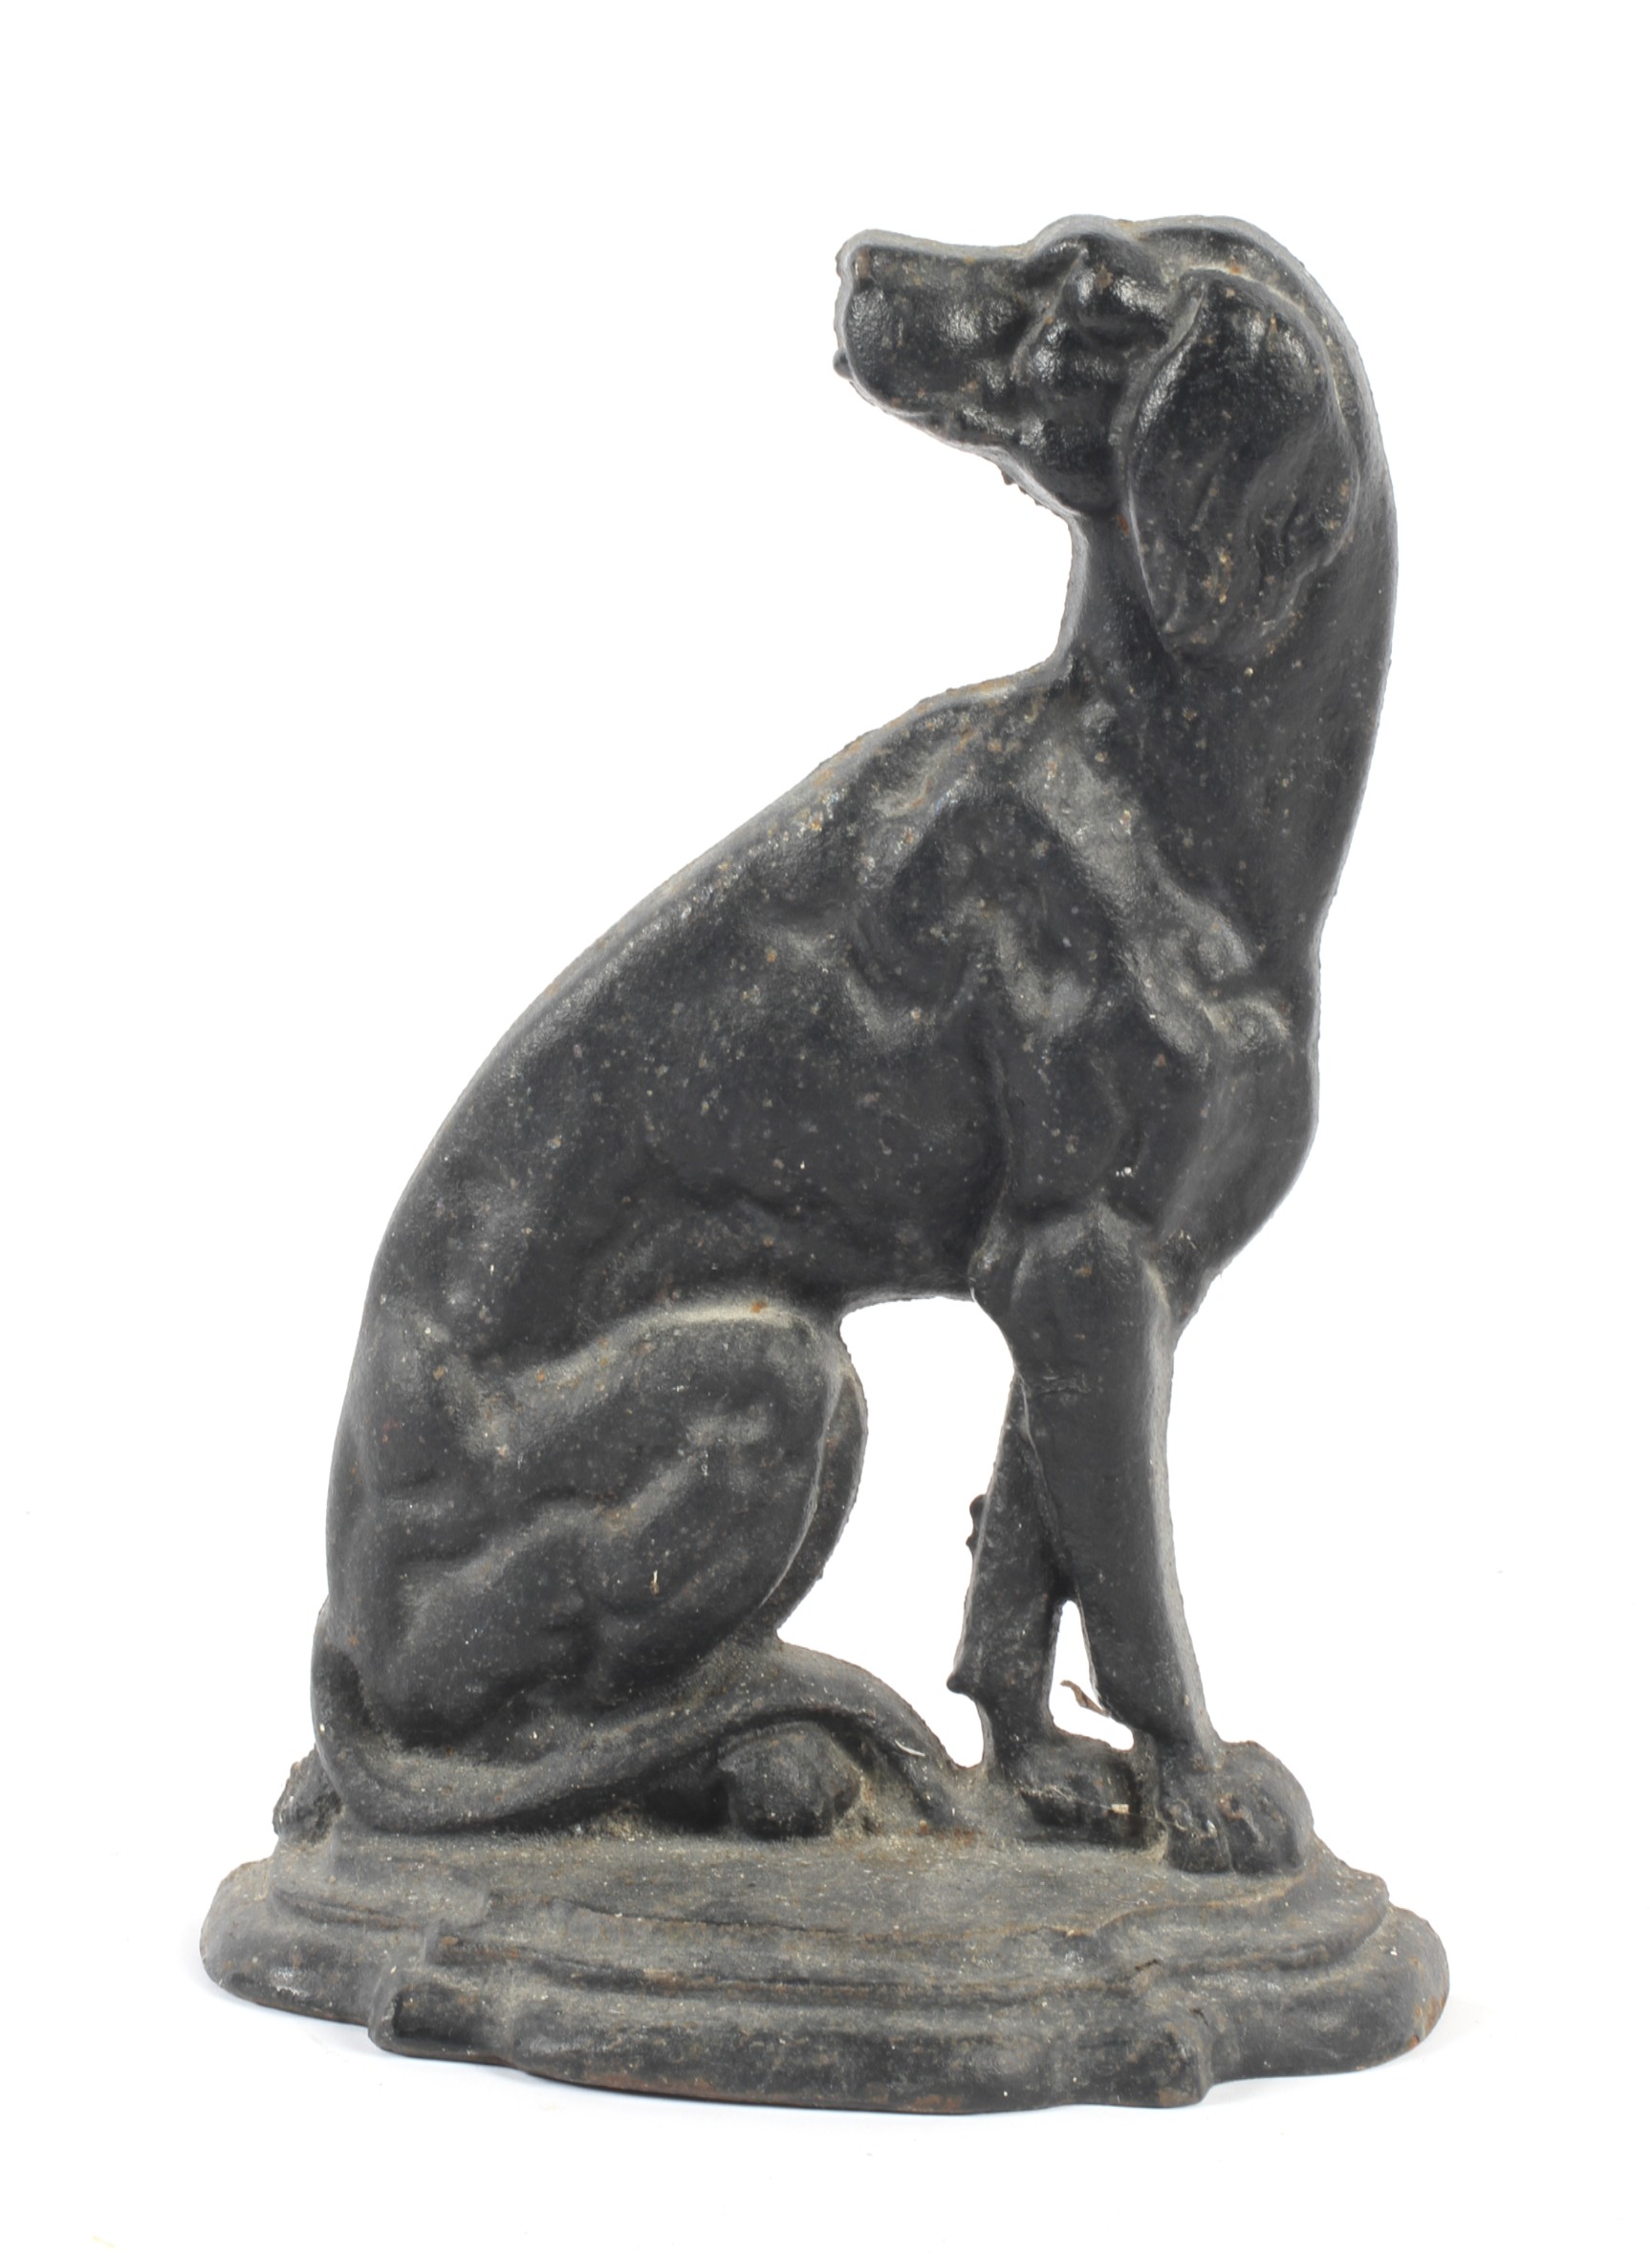 A cast iron doorstop in the form of a seated hound.